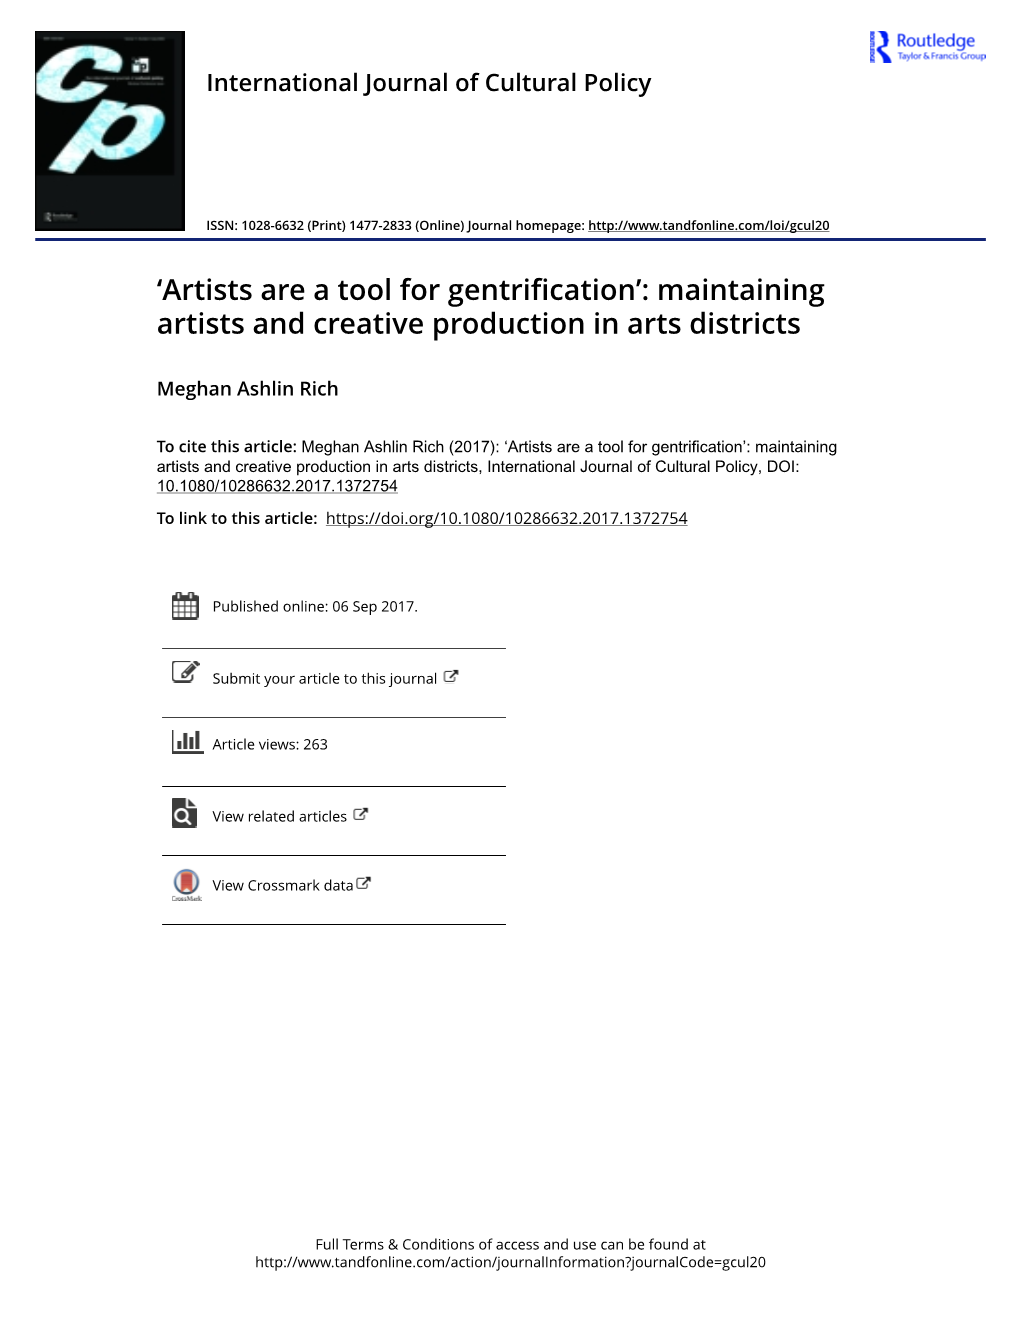 Artists Are a Tool for Gentrification’: Maintaining Artists and Creative Production in Arts Districts